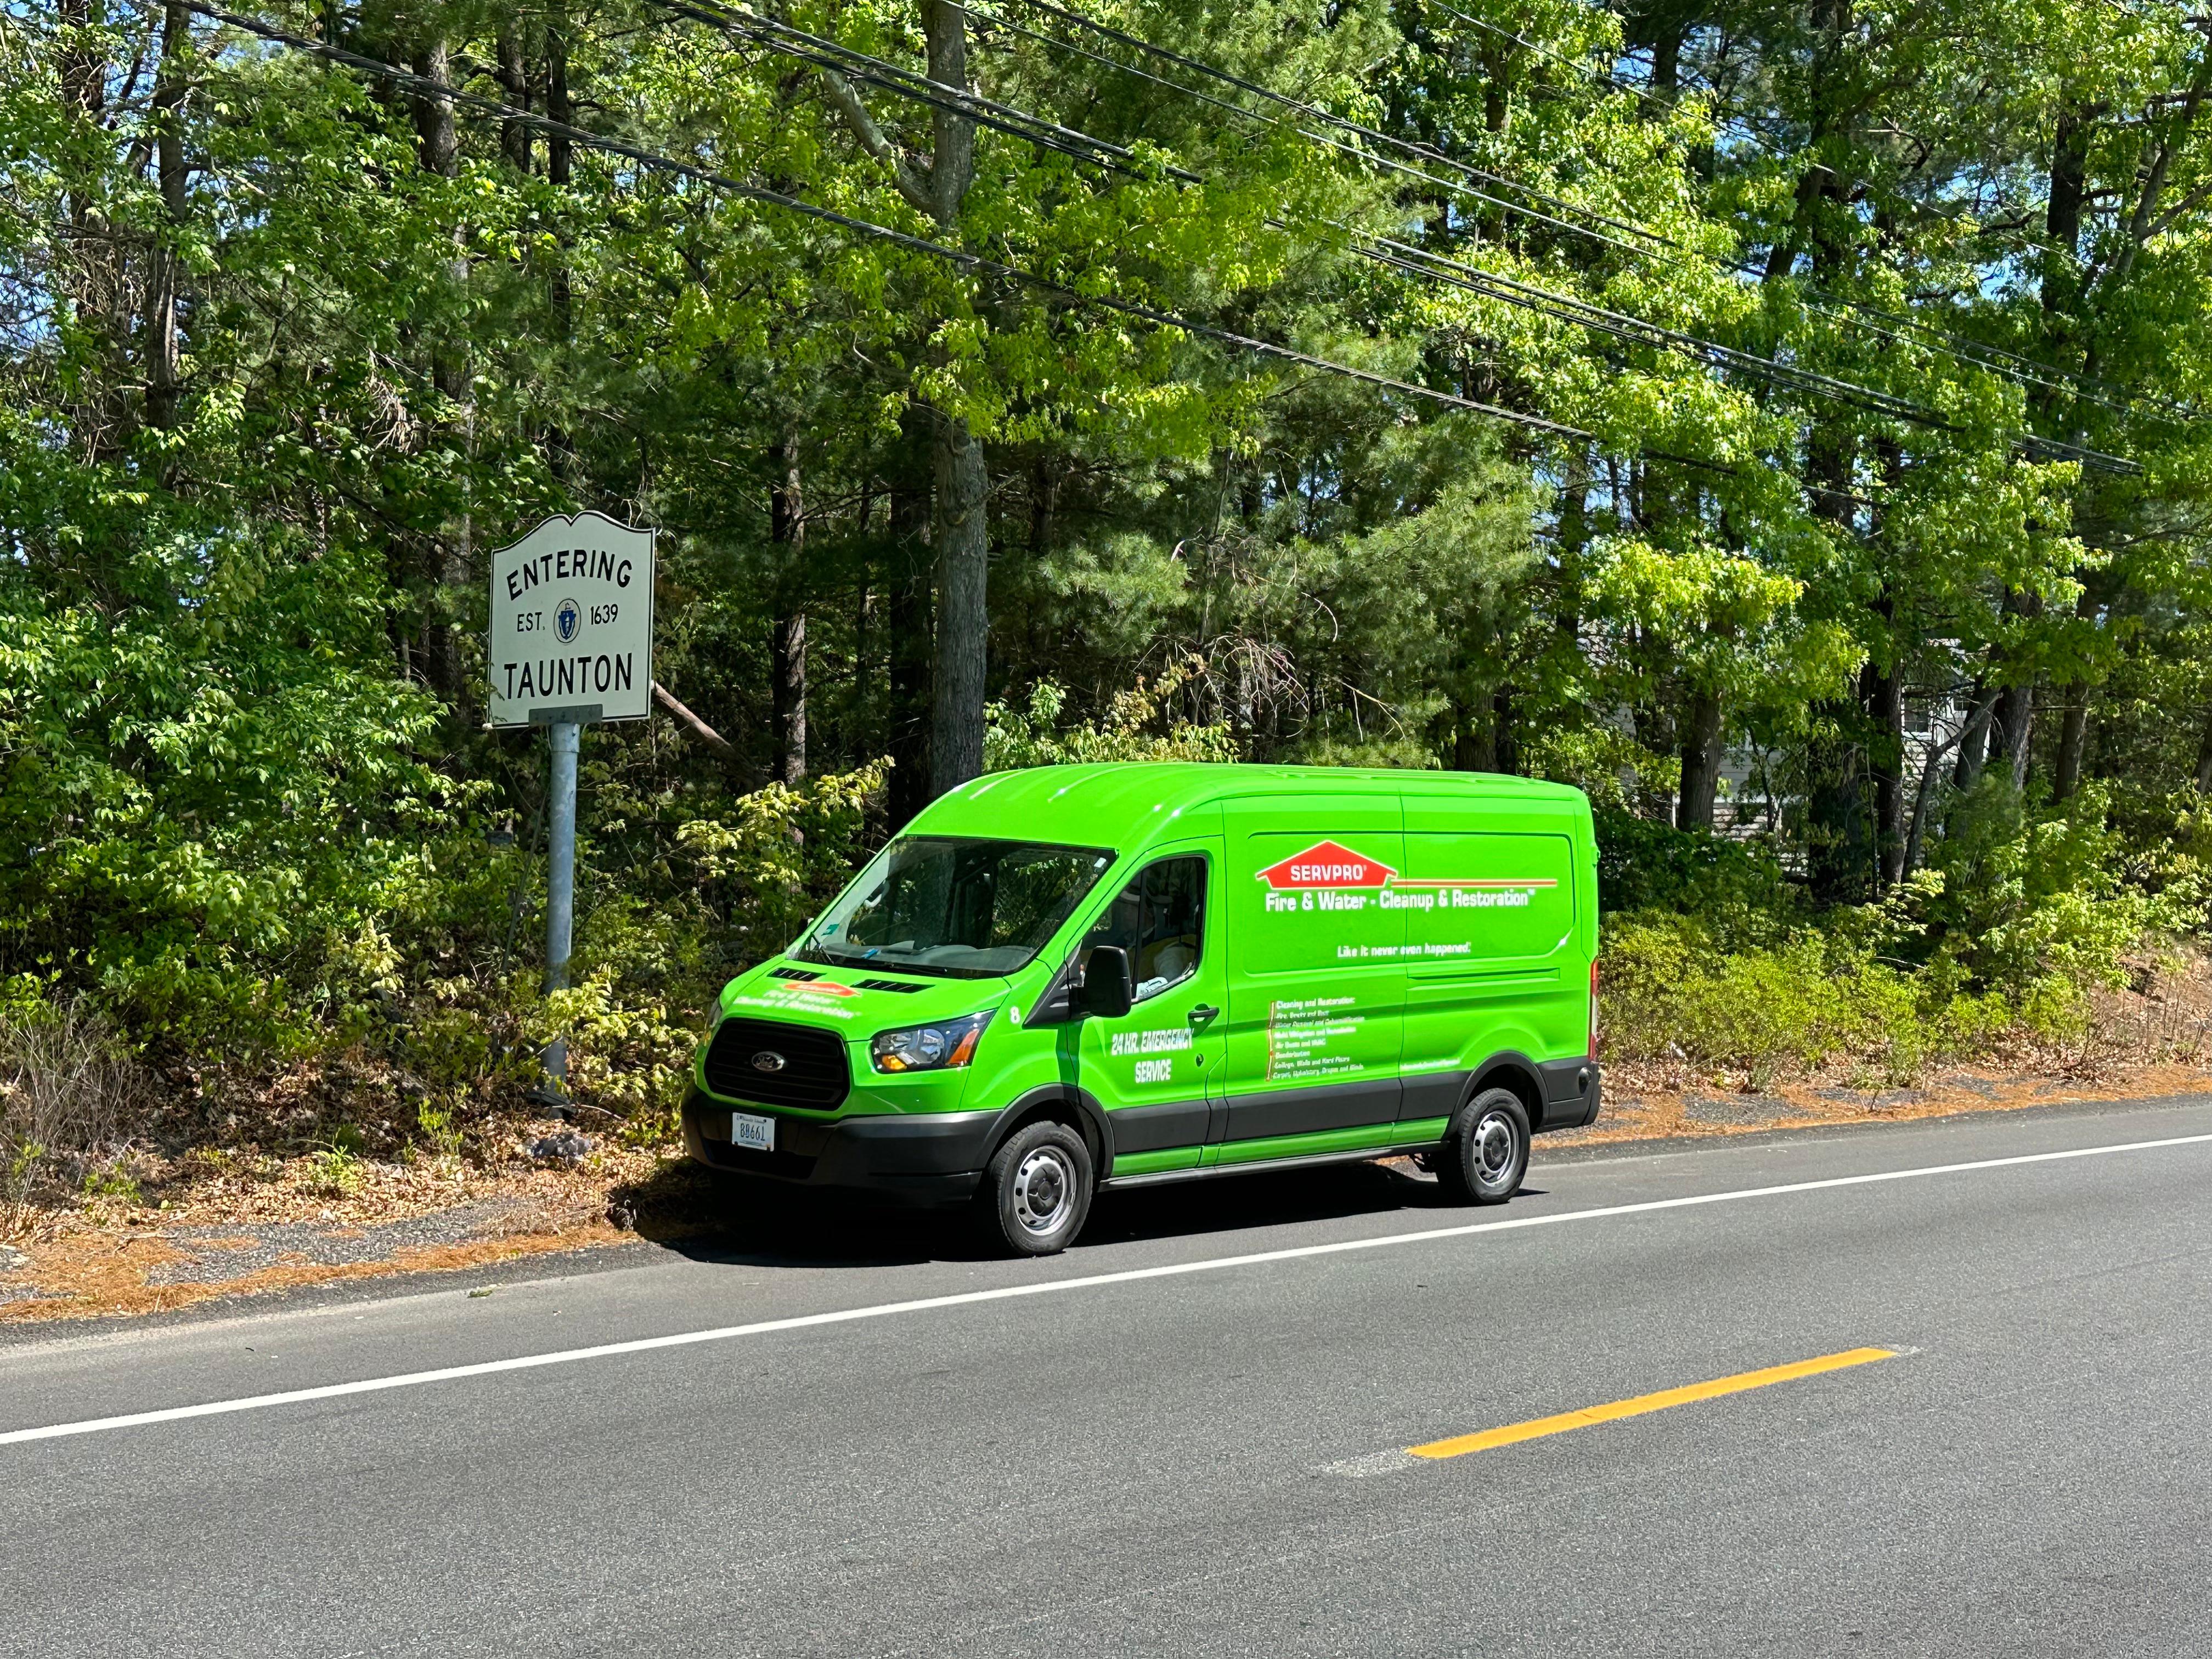 When you need help in an emergency, SERVPRO of Taunton/Mansfield is the name to trust. Our experienced professionals are available 24/7 to provide top-quality restoration services for water, fire, and mold damage in Taunton, MA.